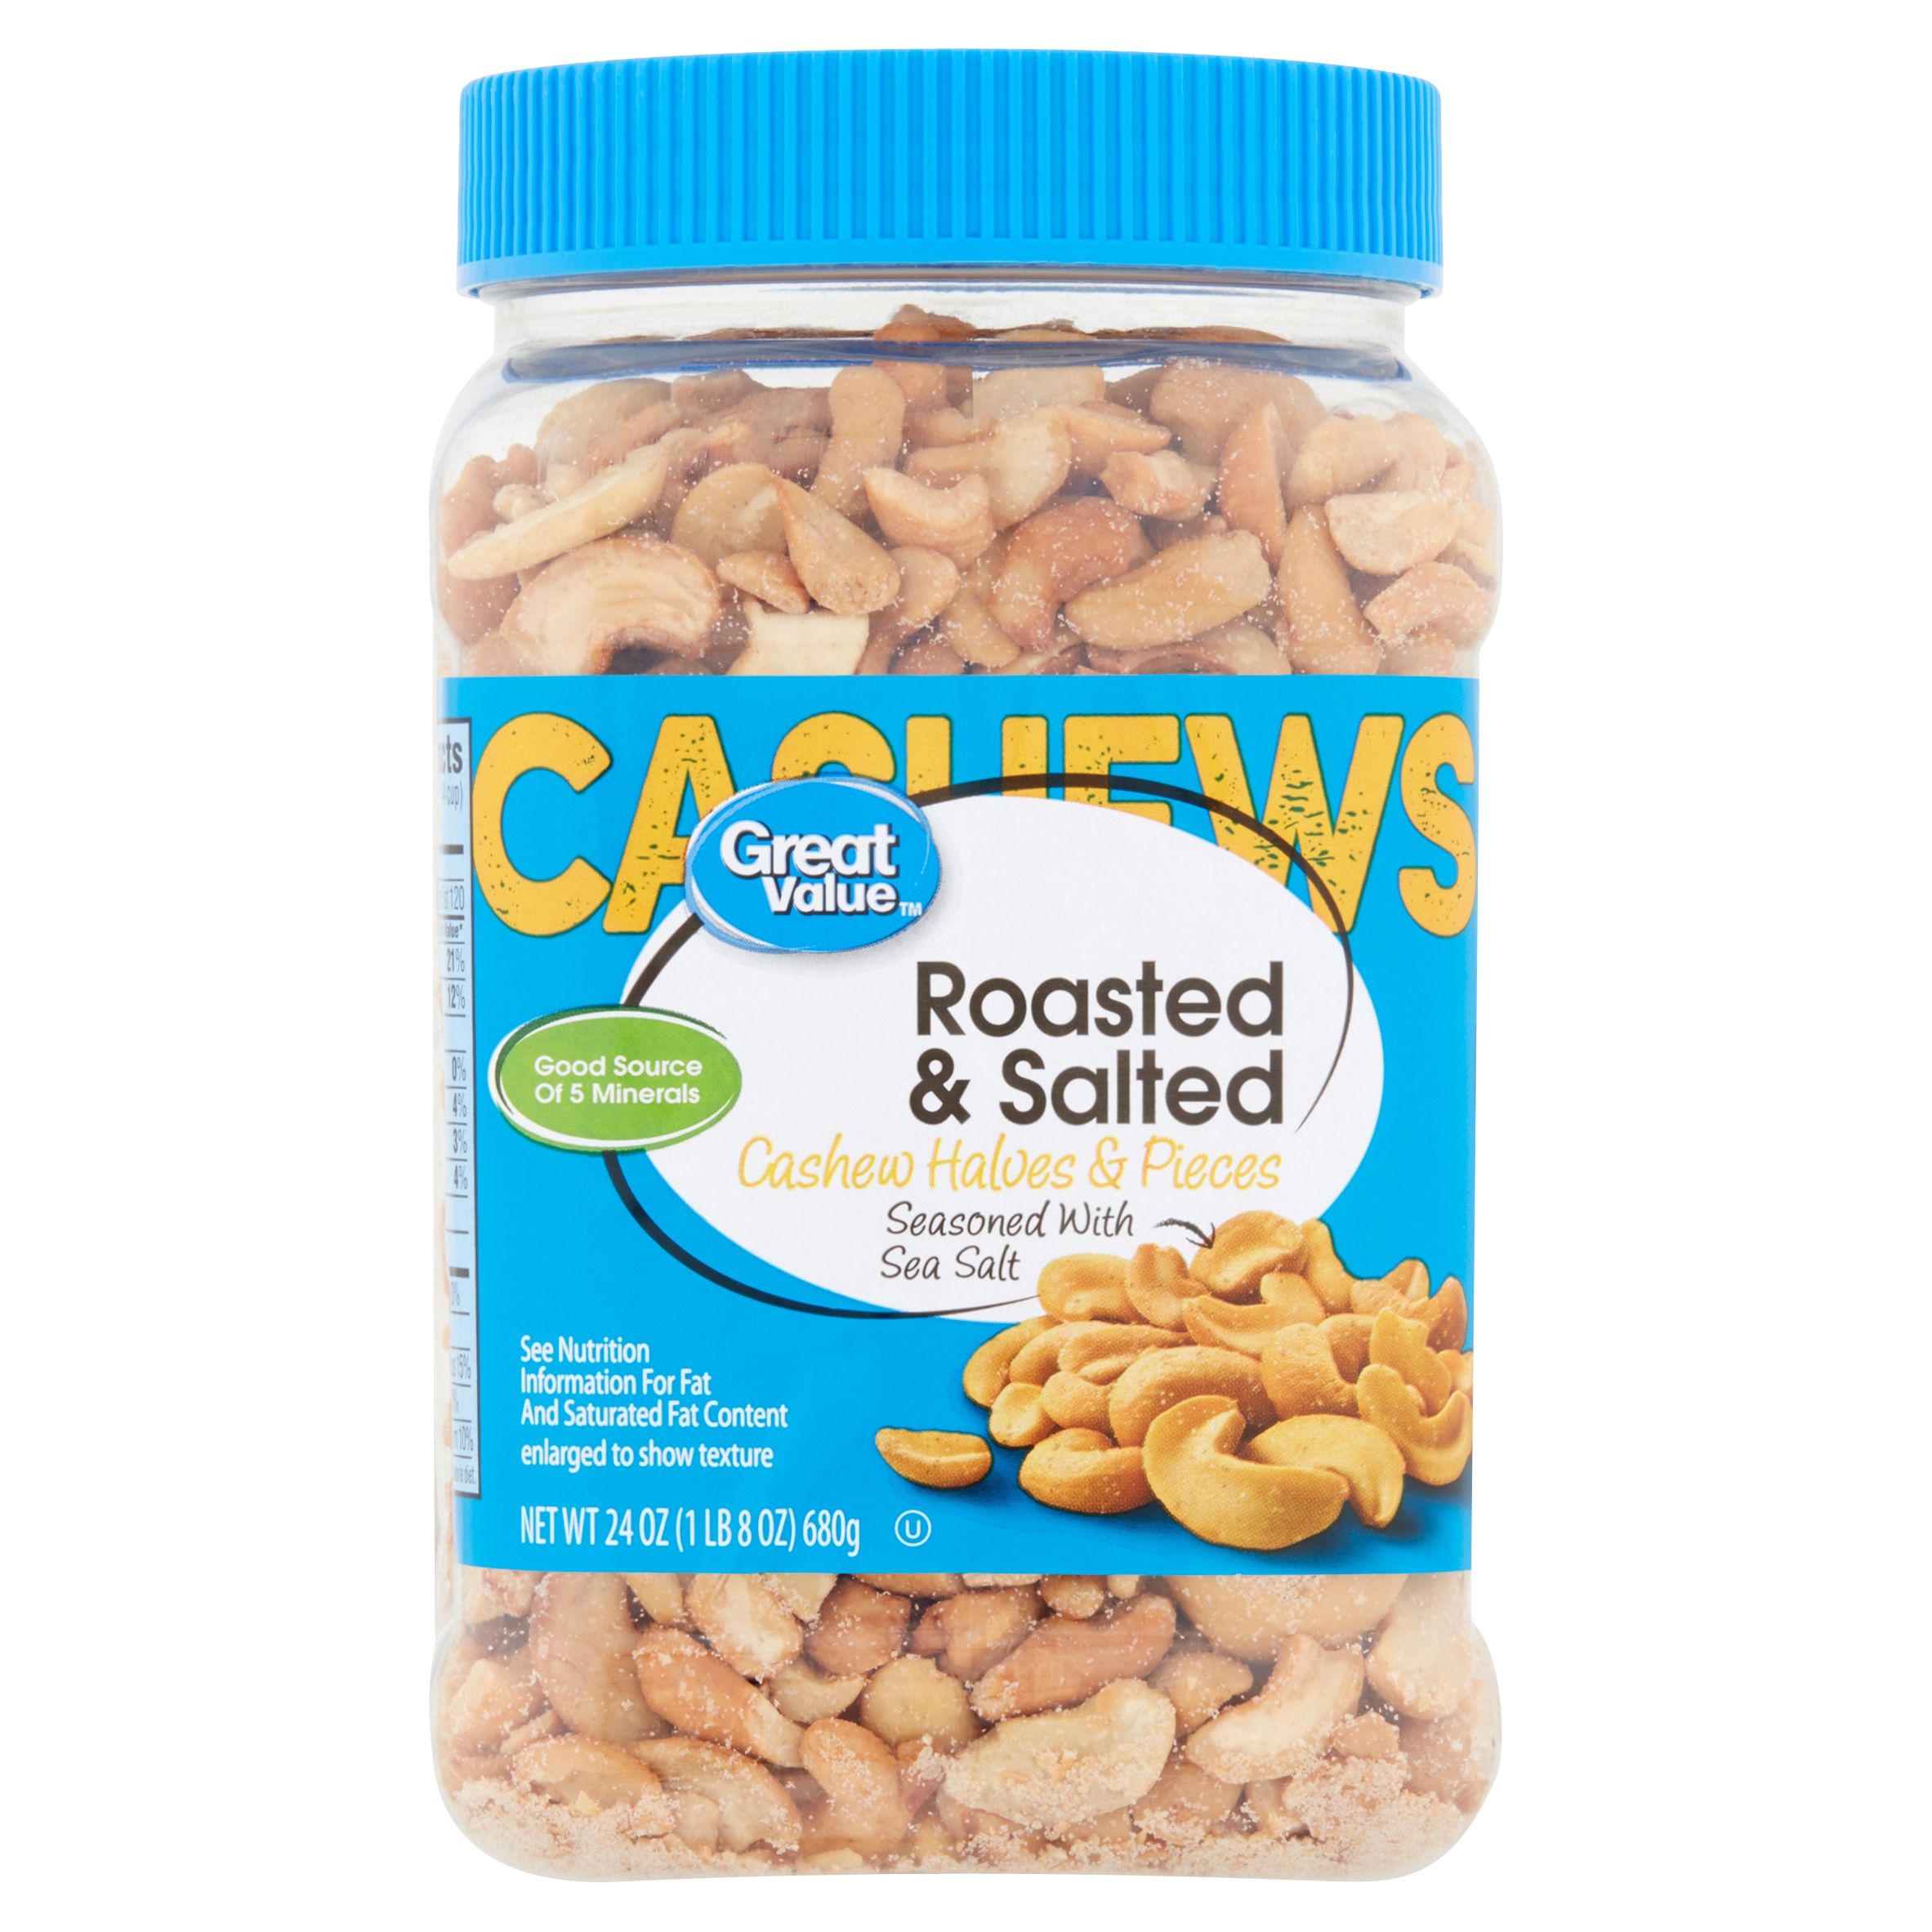 Great Value Roasted & Salted Cashew Halves & Pieces, 24 oz - image 5 of 9